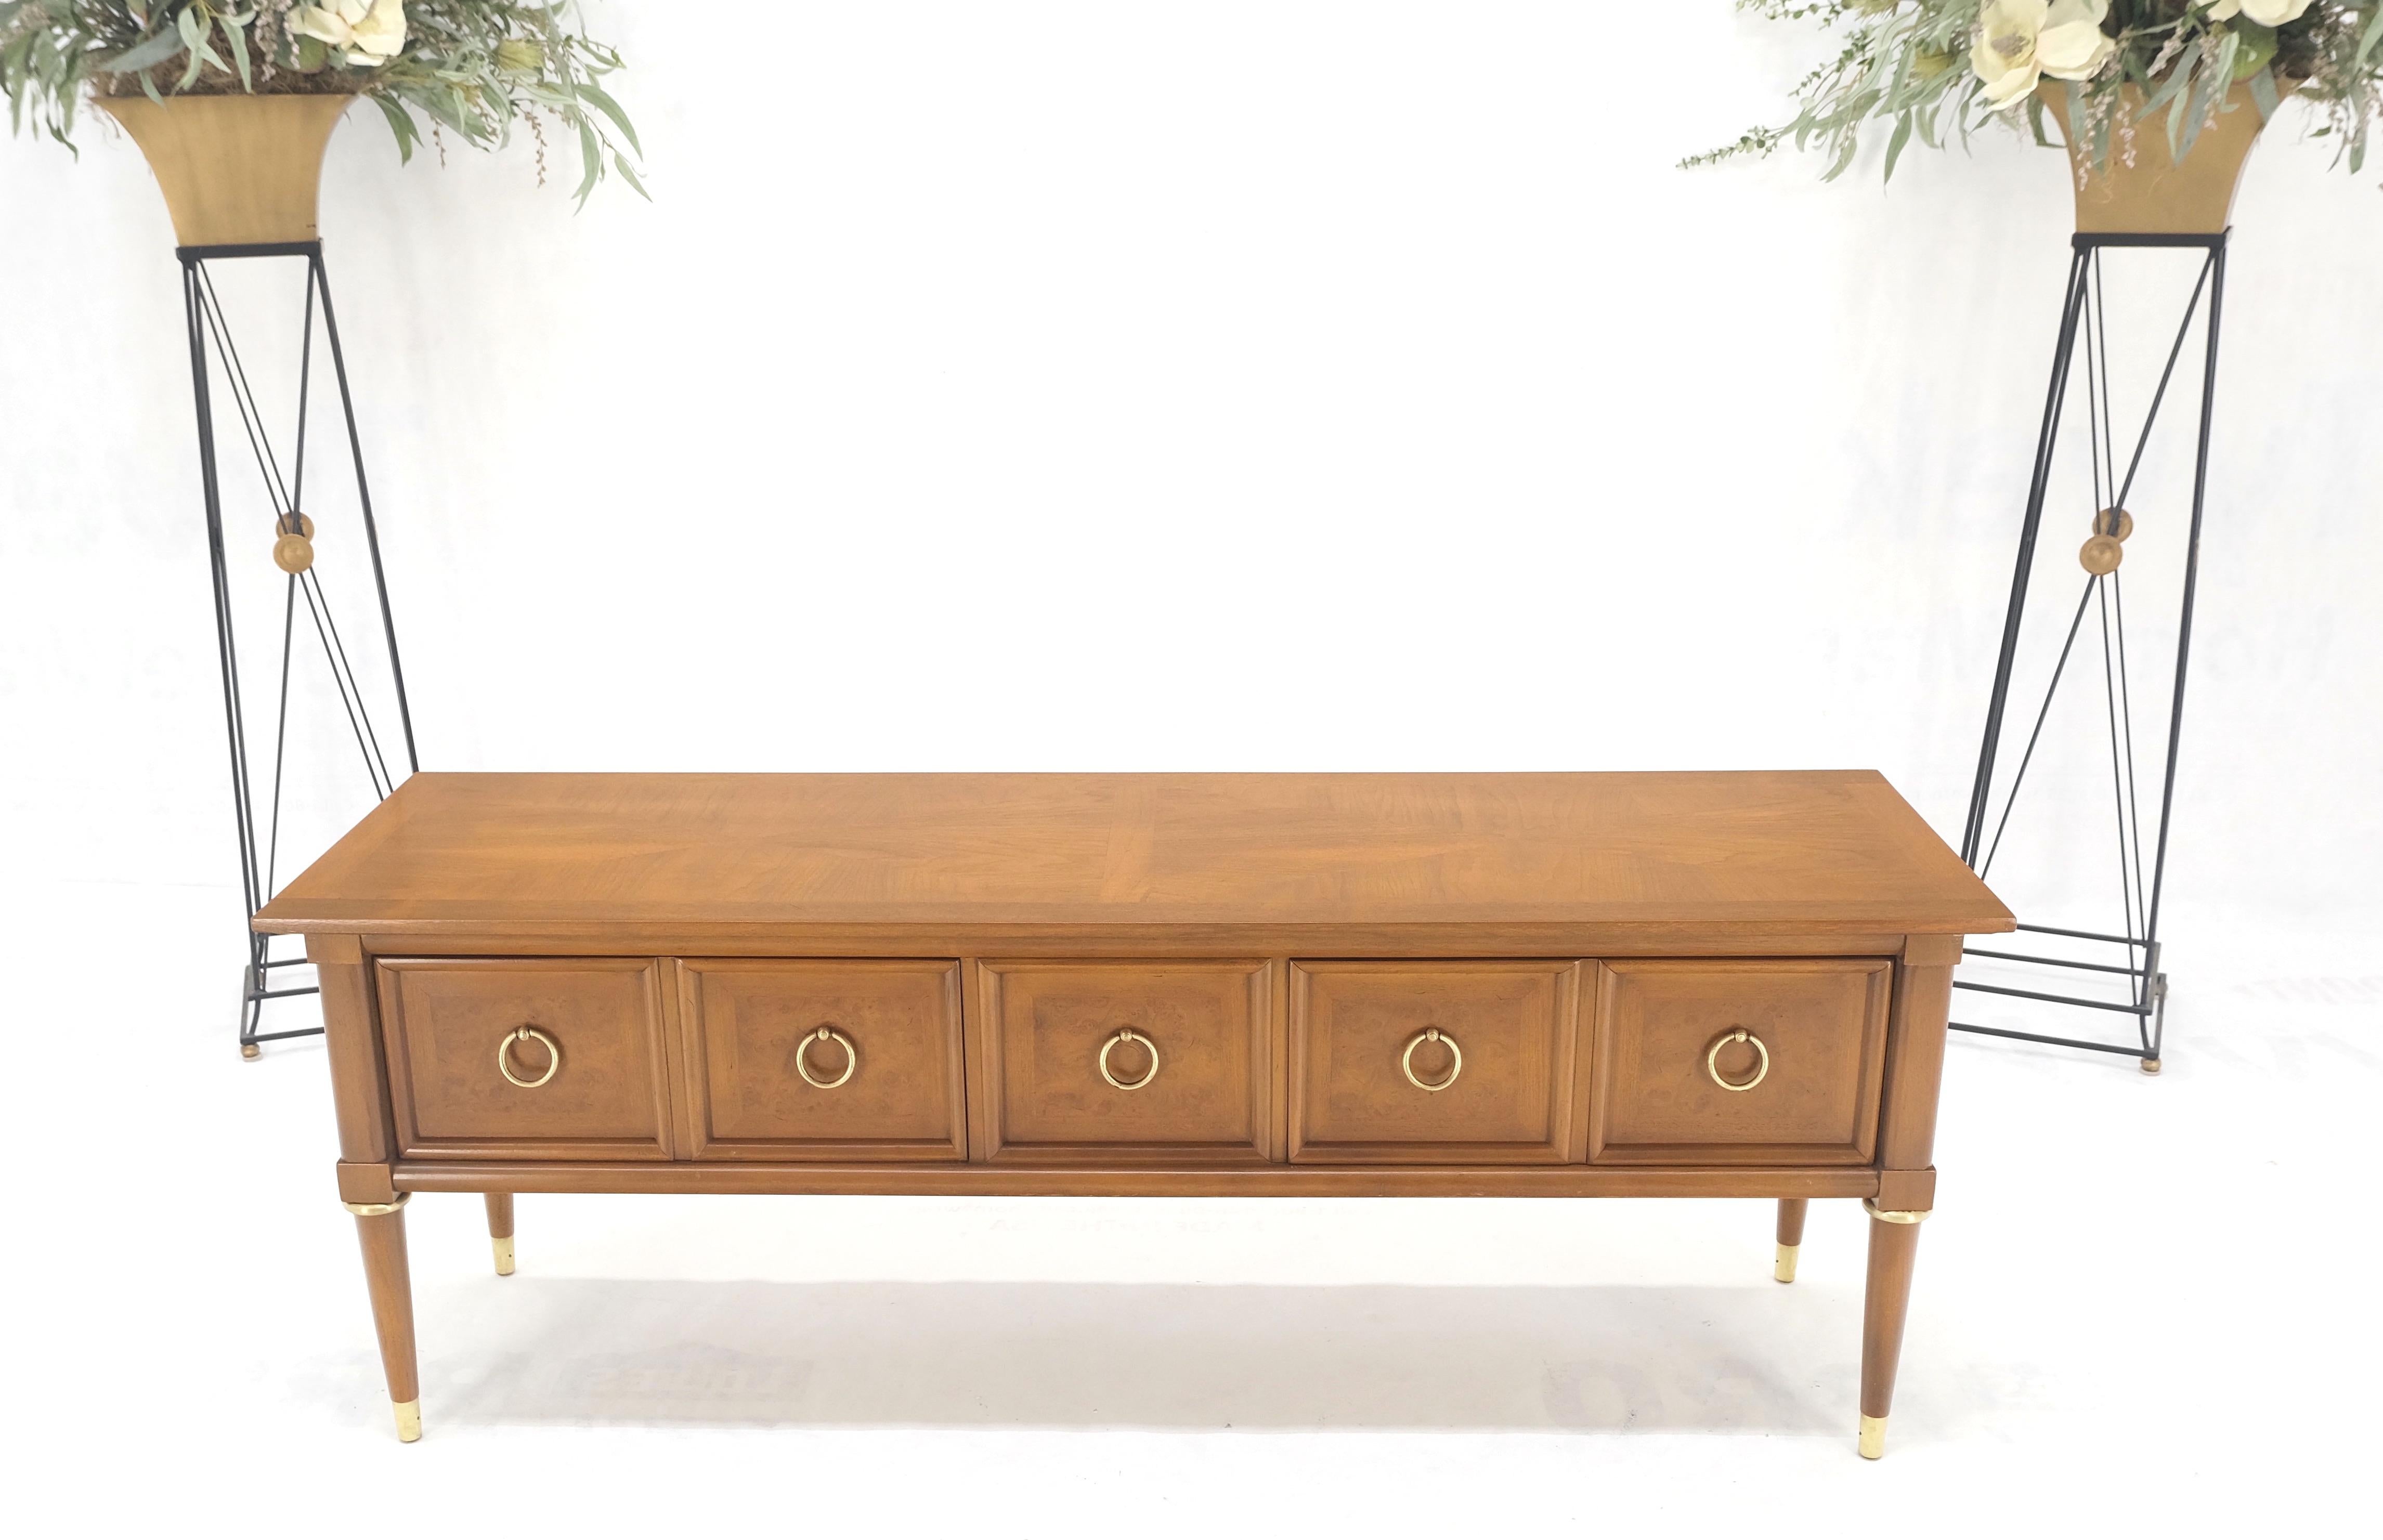 Messing Drop Rings Pulls Low Profile Tapered Legs Long Credenza Mid Century MINT! (amerikanisch) im Angebot